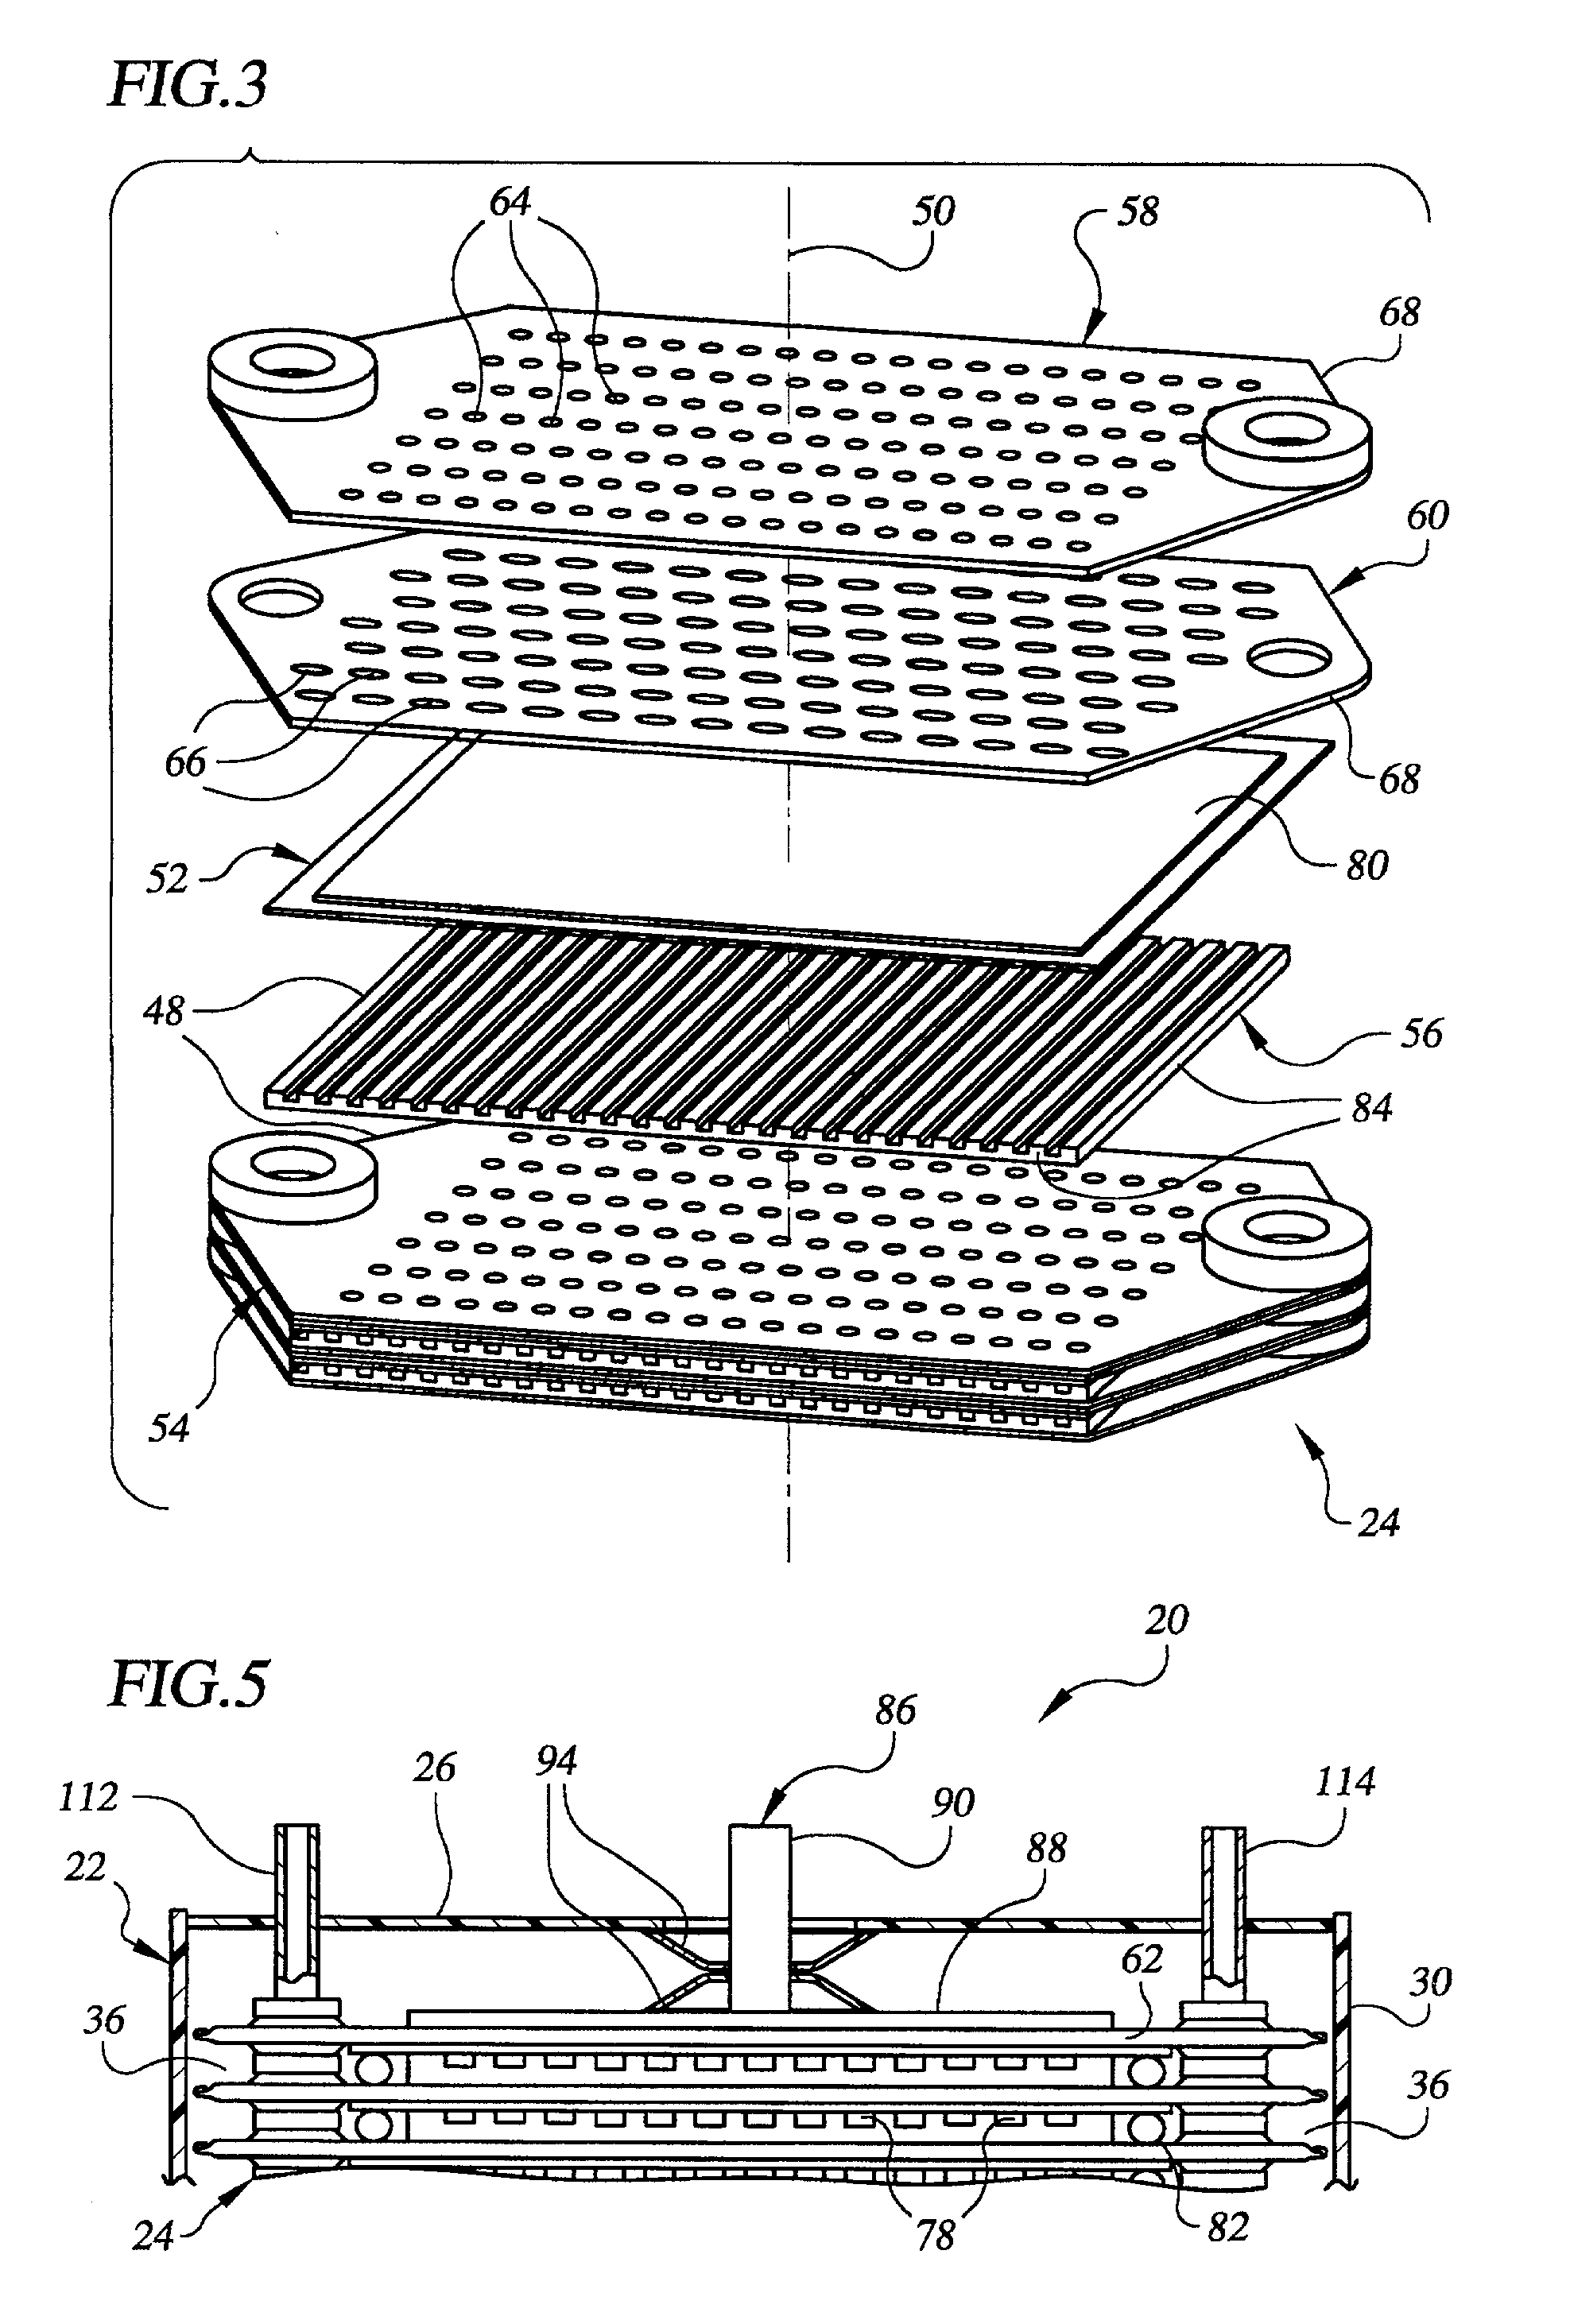 Lightweight direct methanol fuel cell and supporting systems